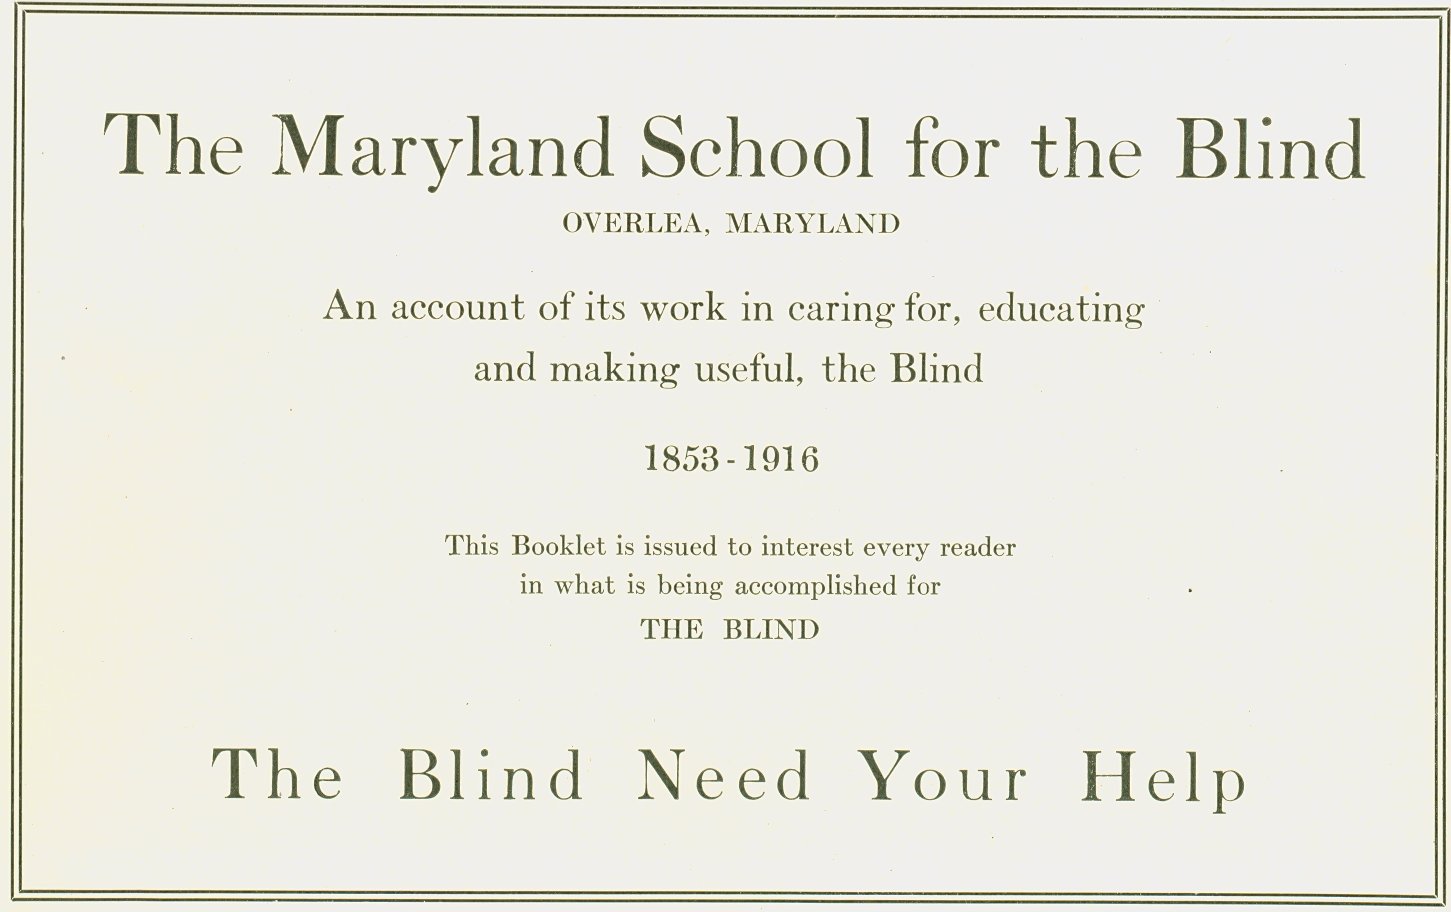 Maryland School for the Blind fundraising booklet-1